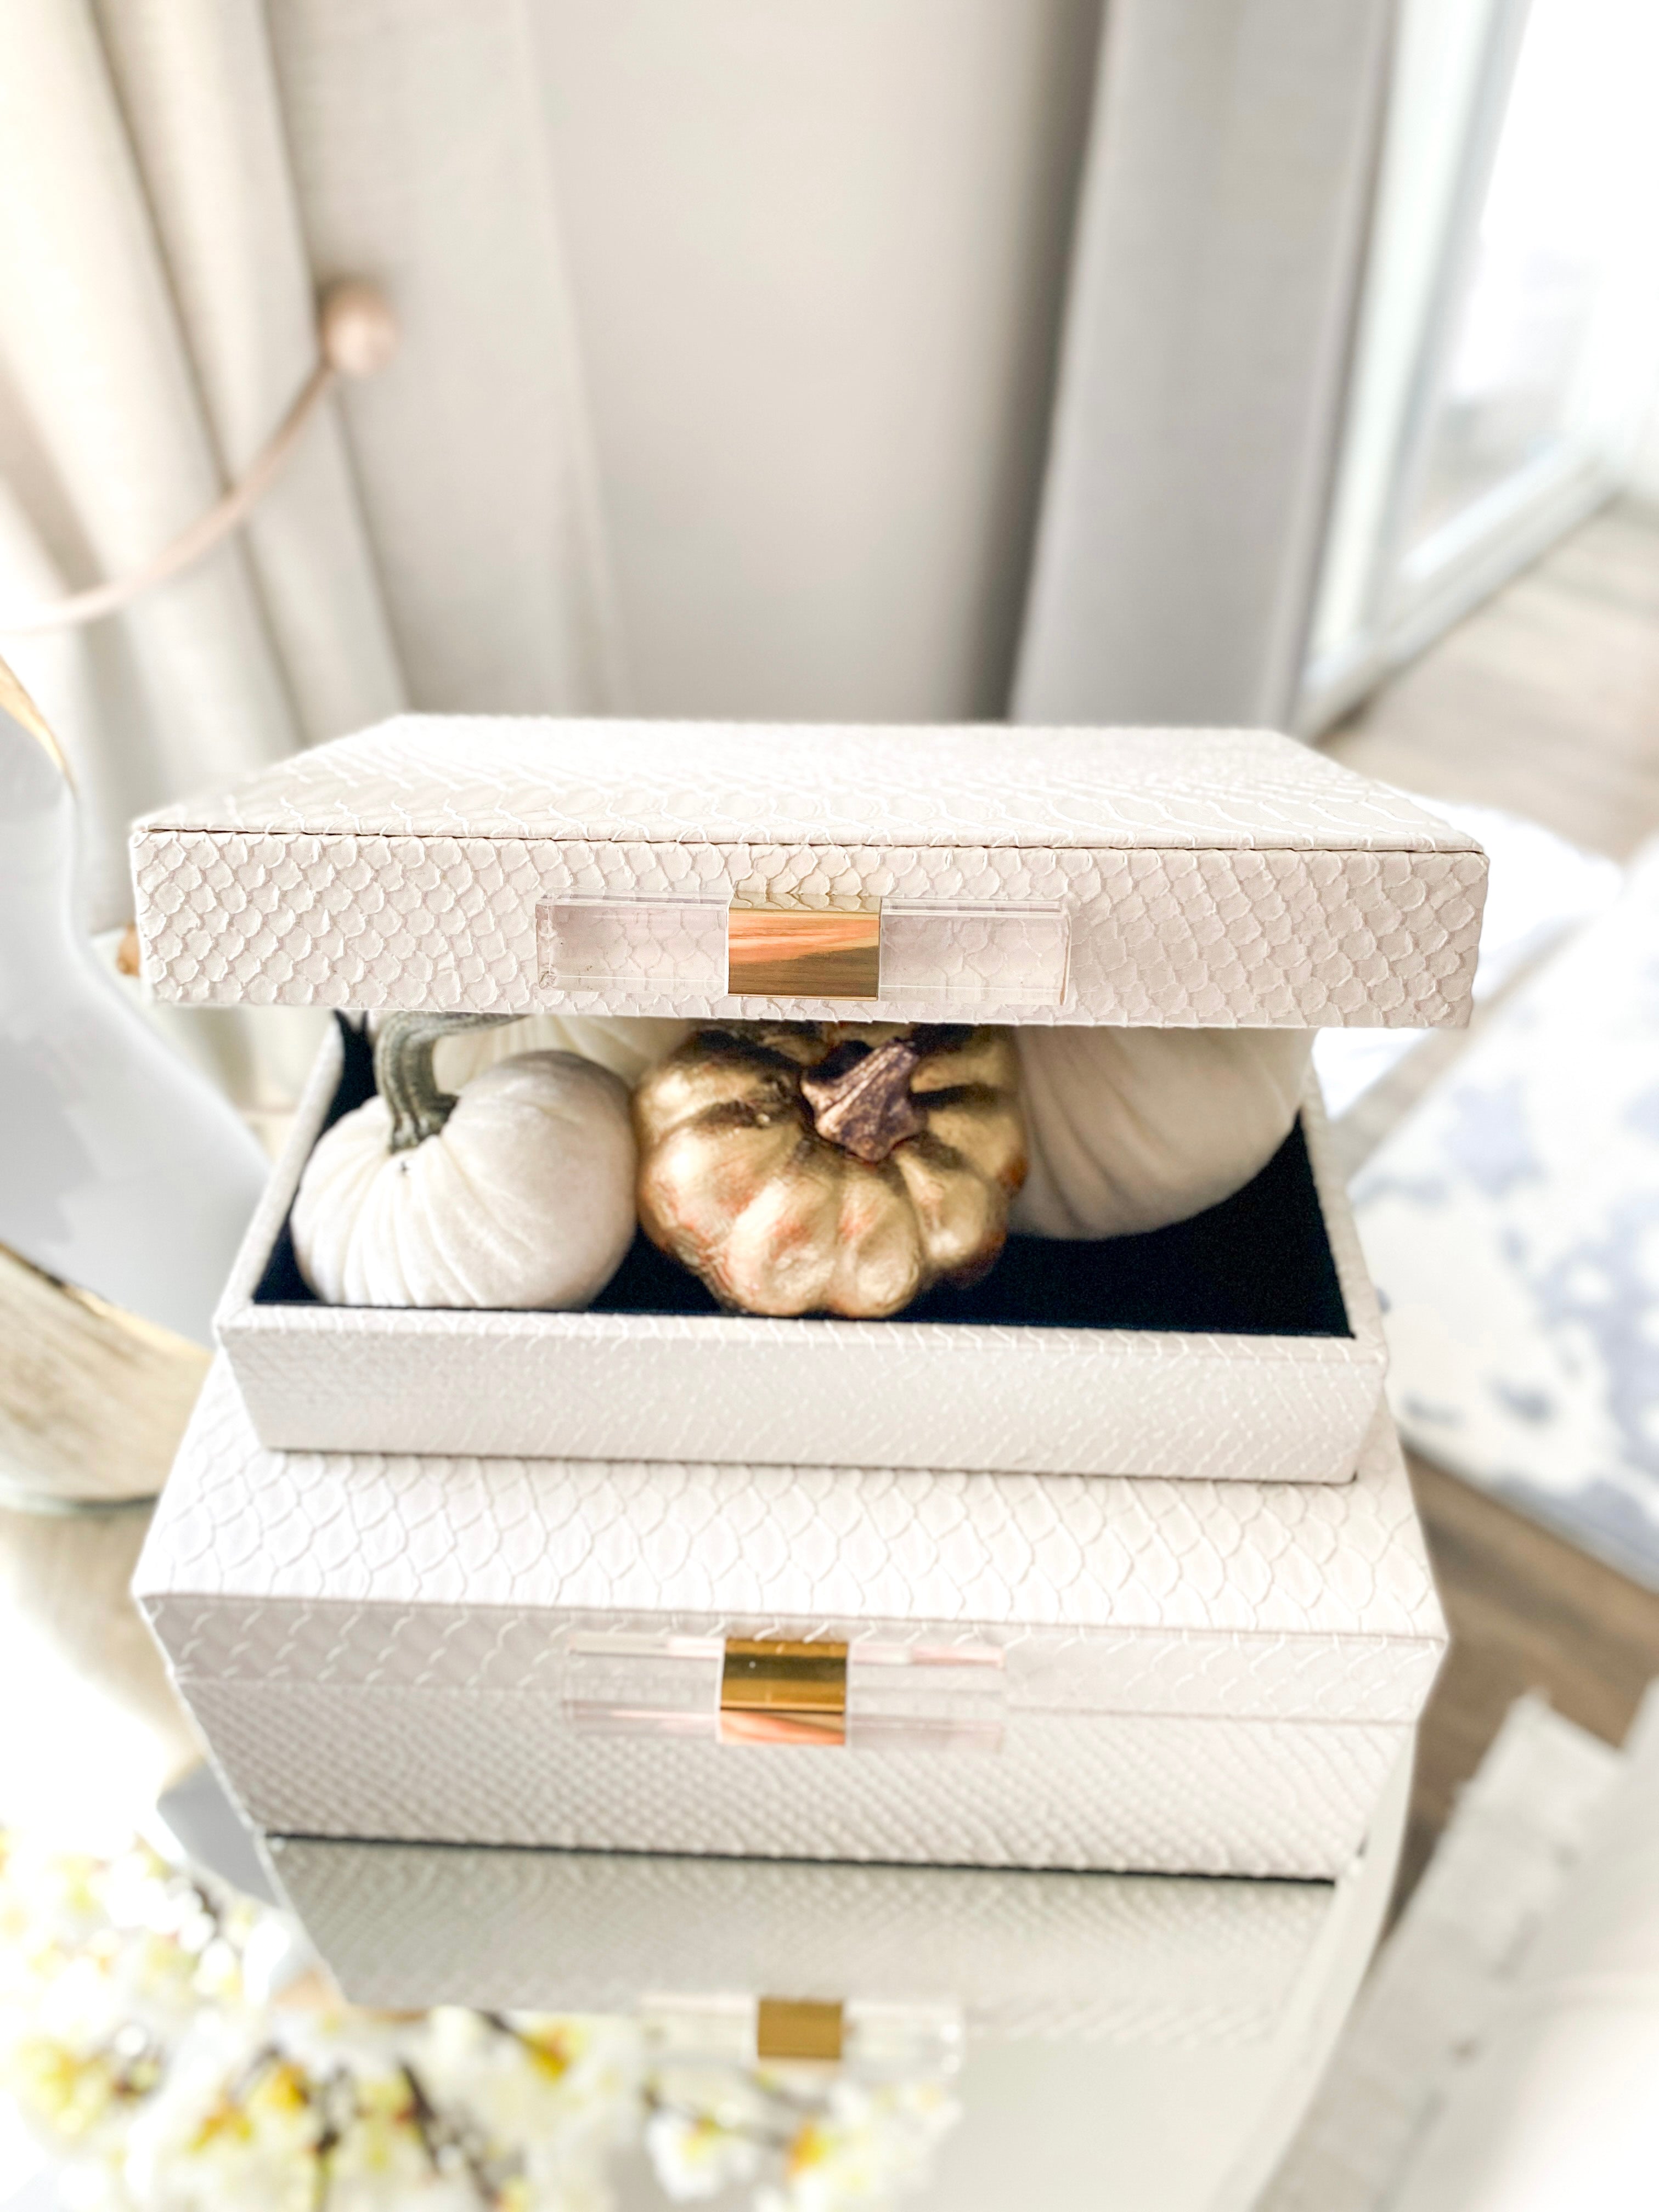 White & gold Leather Boxes Set of 2 - HTS HOME DECOR